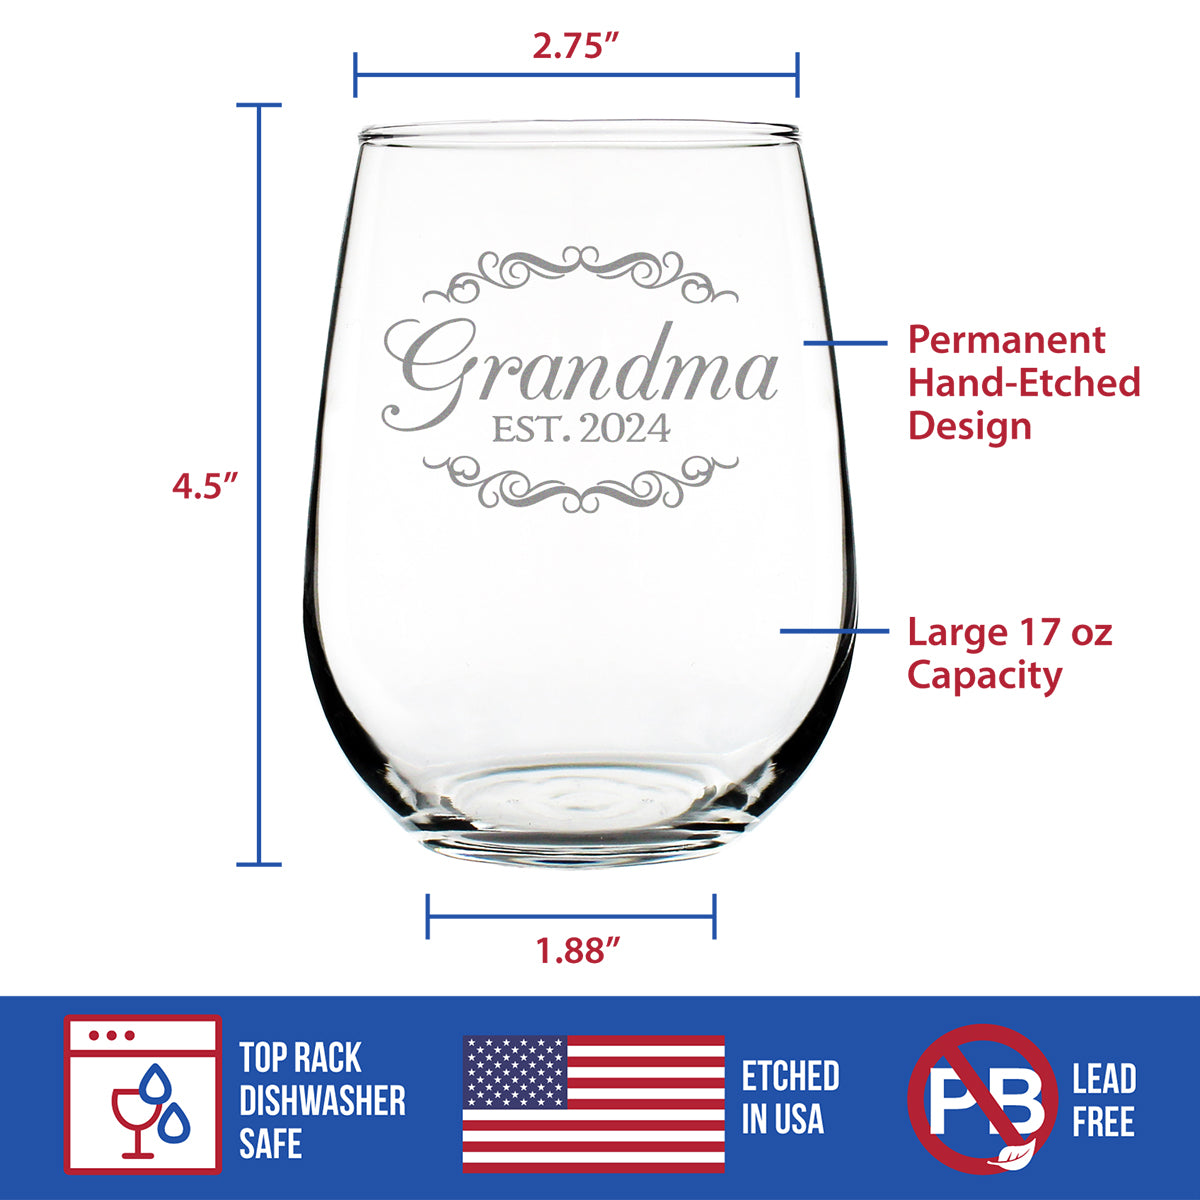 Grandma Est 2024 - New Grandmother Stemless Wine Glass Gift for First Time Grandparents - Decorative 17 Oz Large Glasses